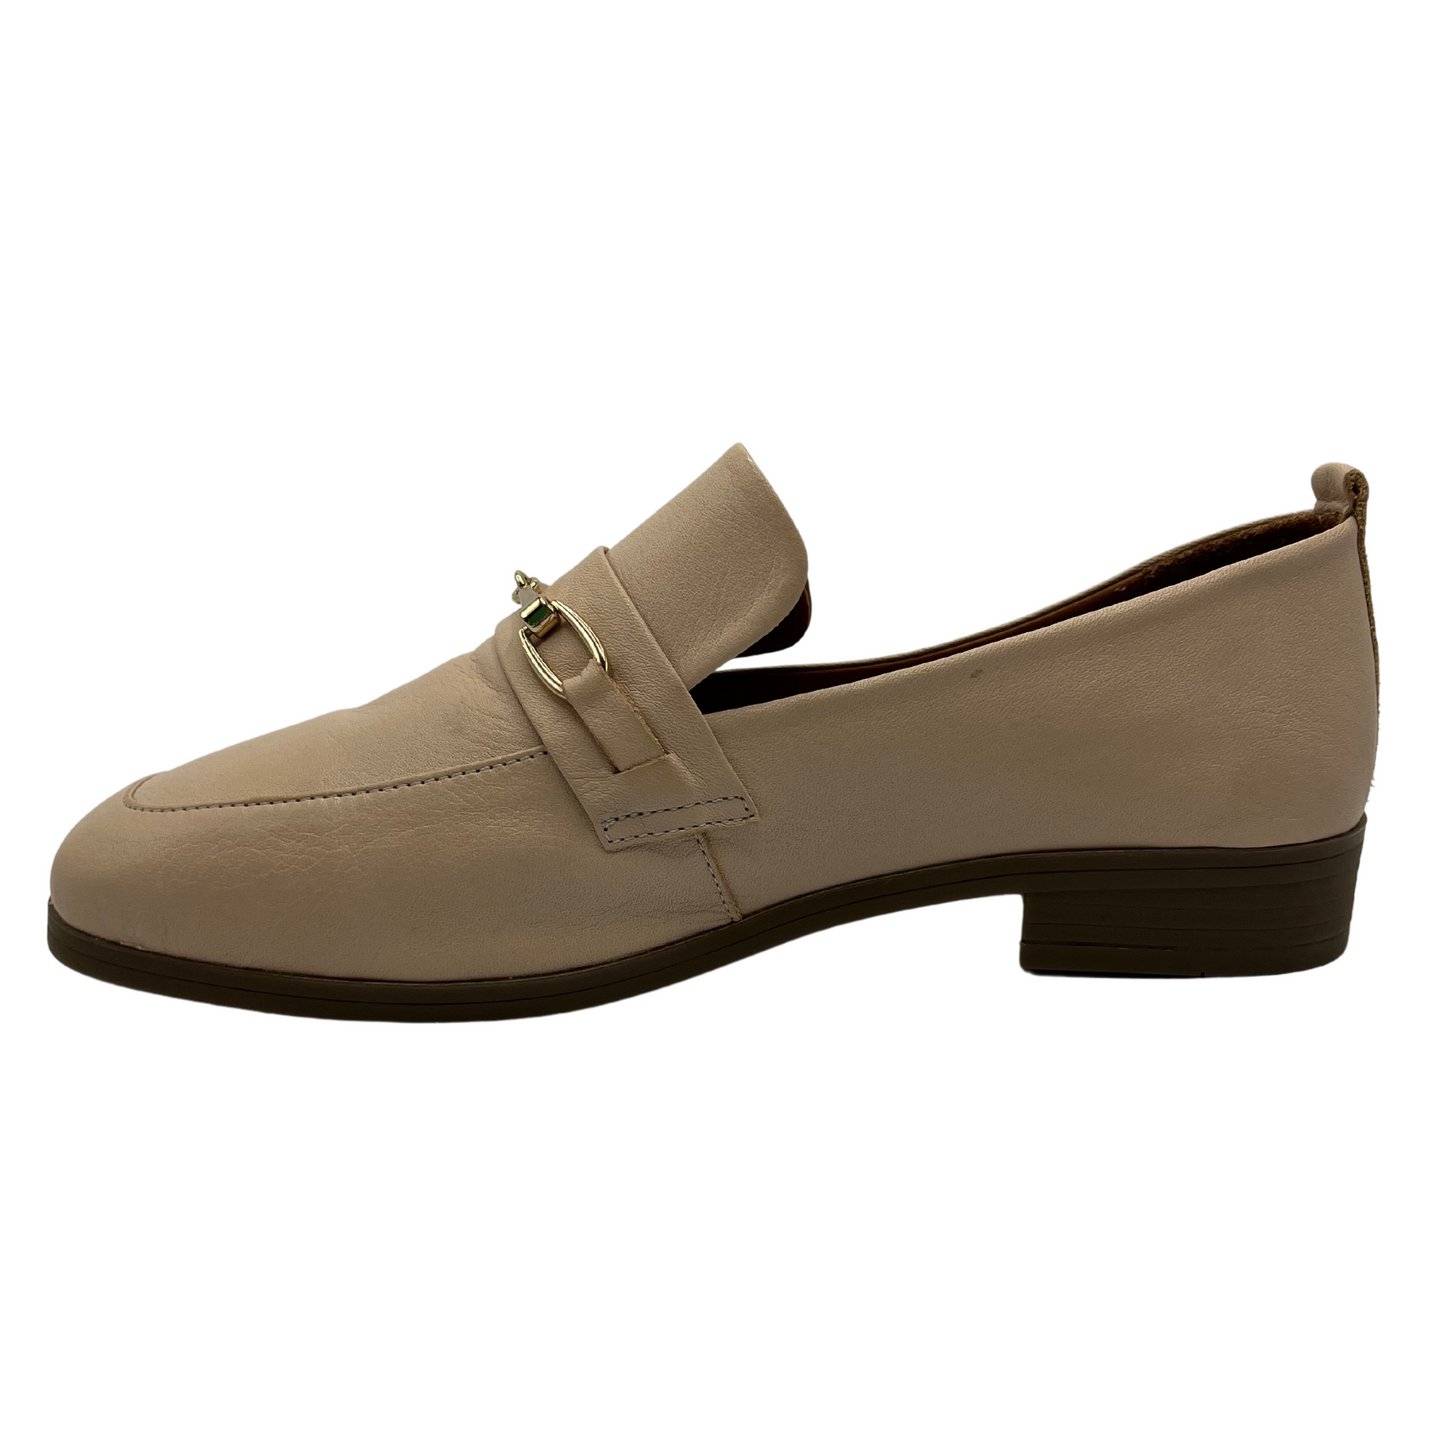 Left facing view of nude leather loafers with gold bit detail, leather lining and short heel